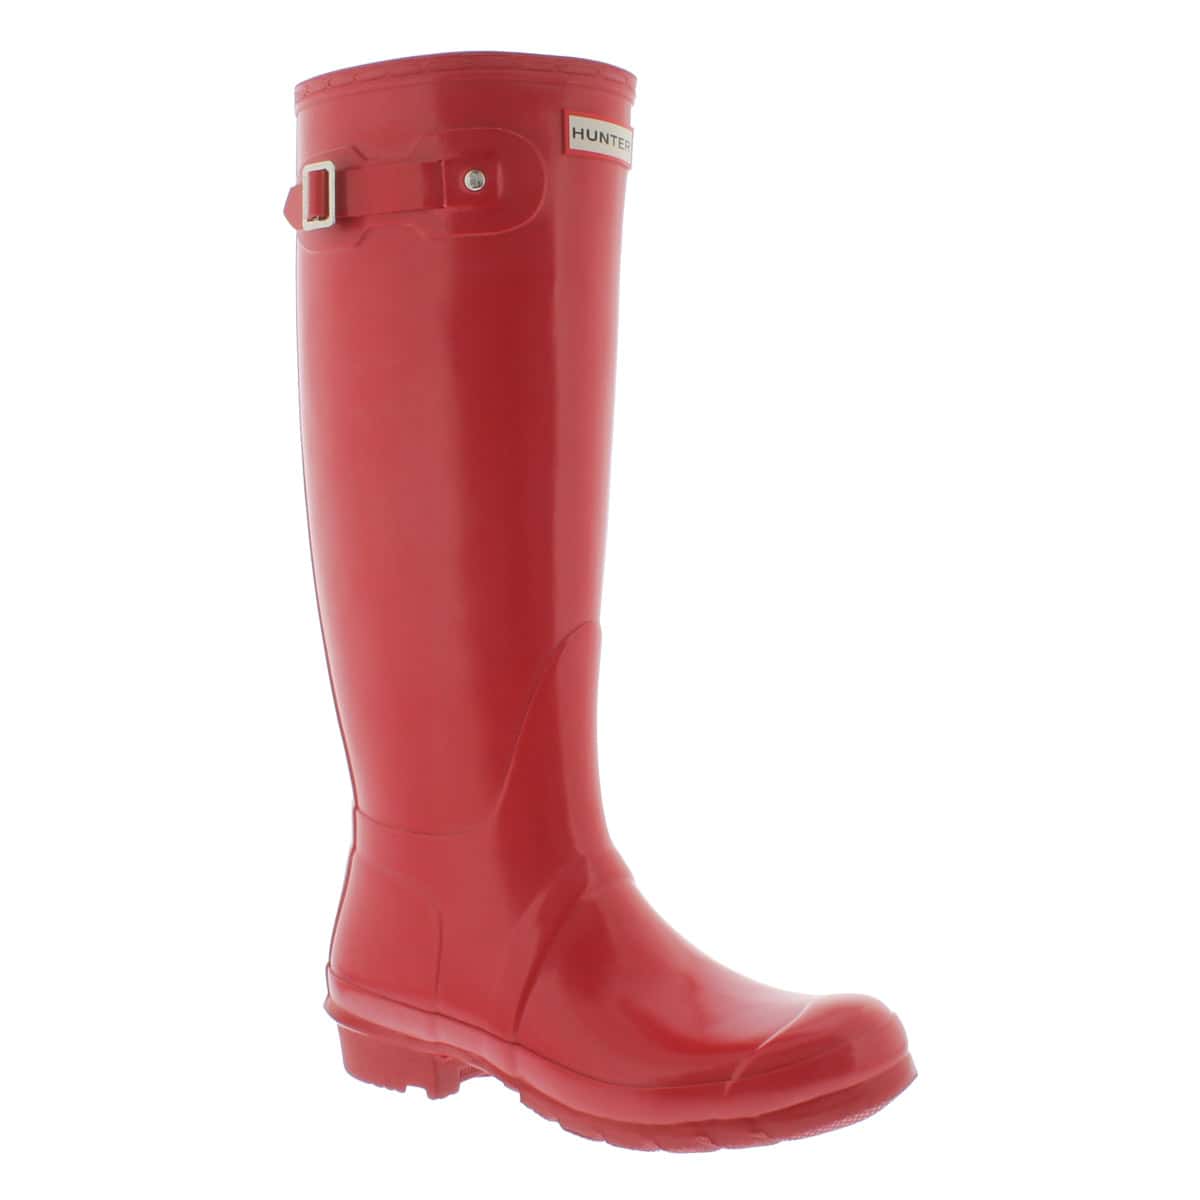 Womens Red Rain Boots | Bsrjc Boots